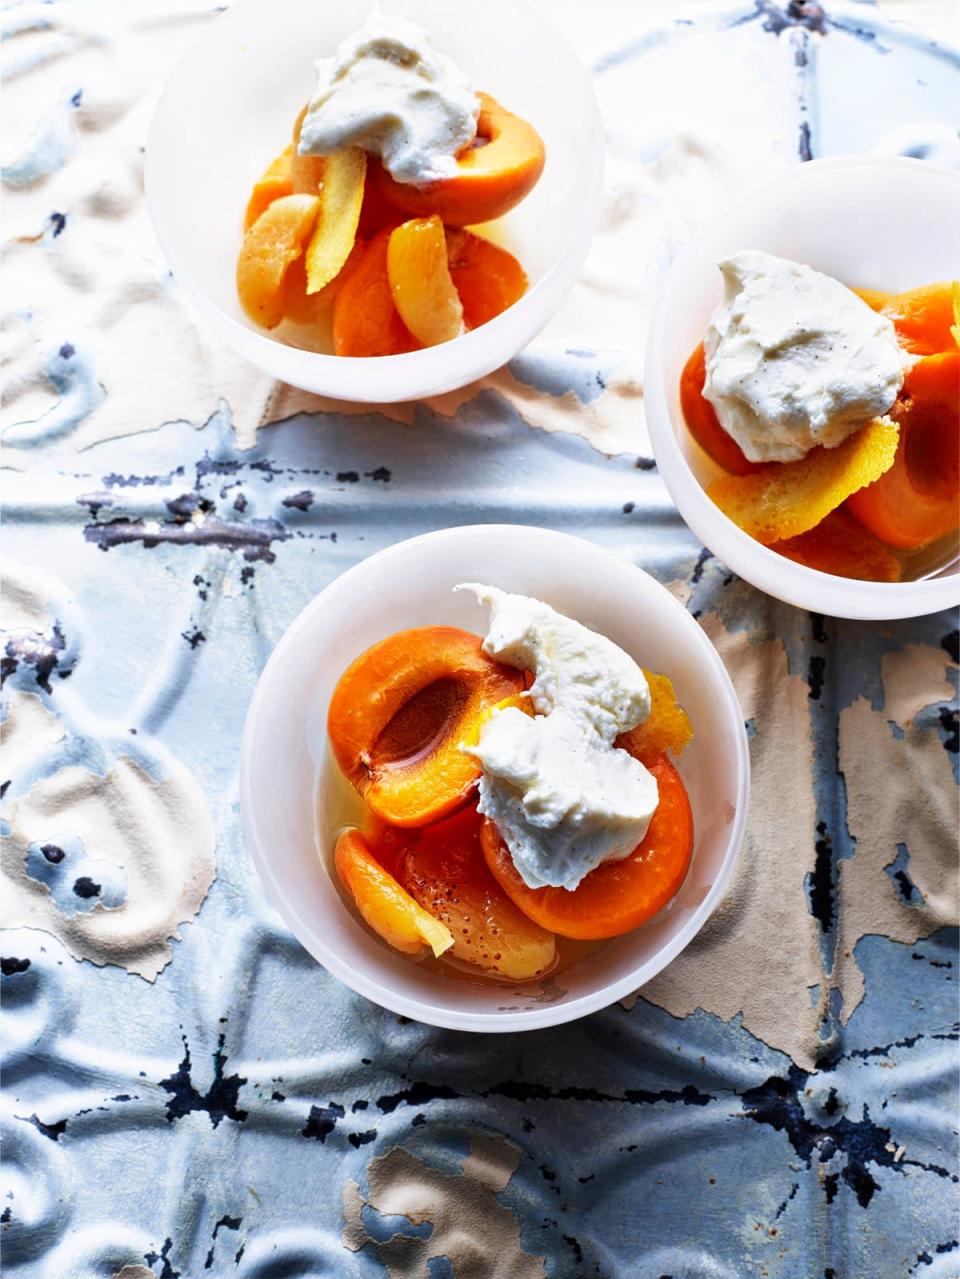 The textues of fresh and dried apricots work together in this dessert (Ben Tish)